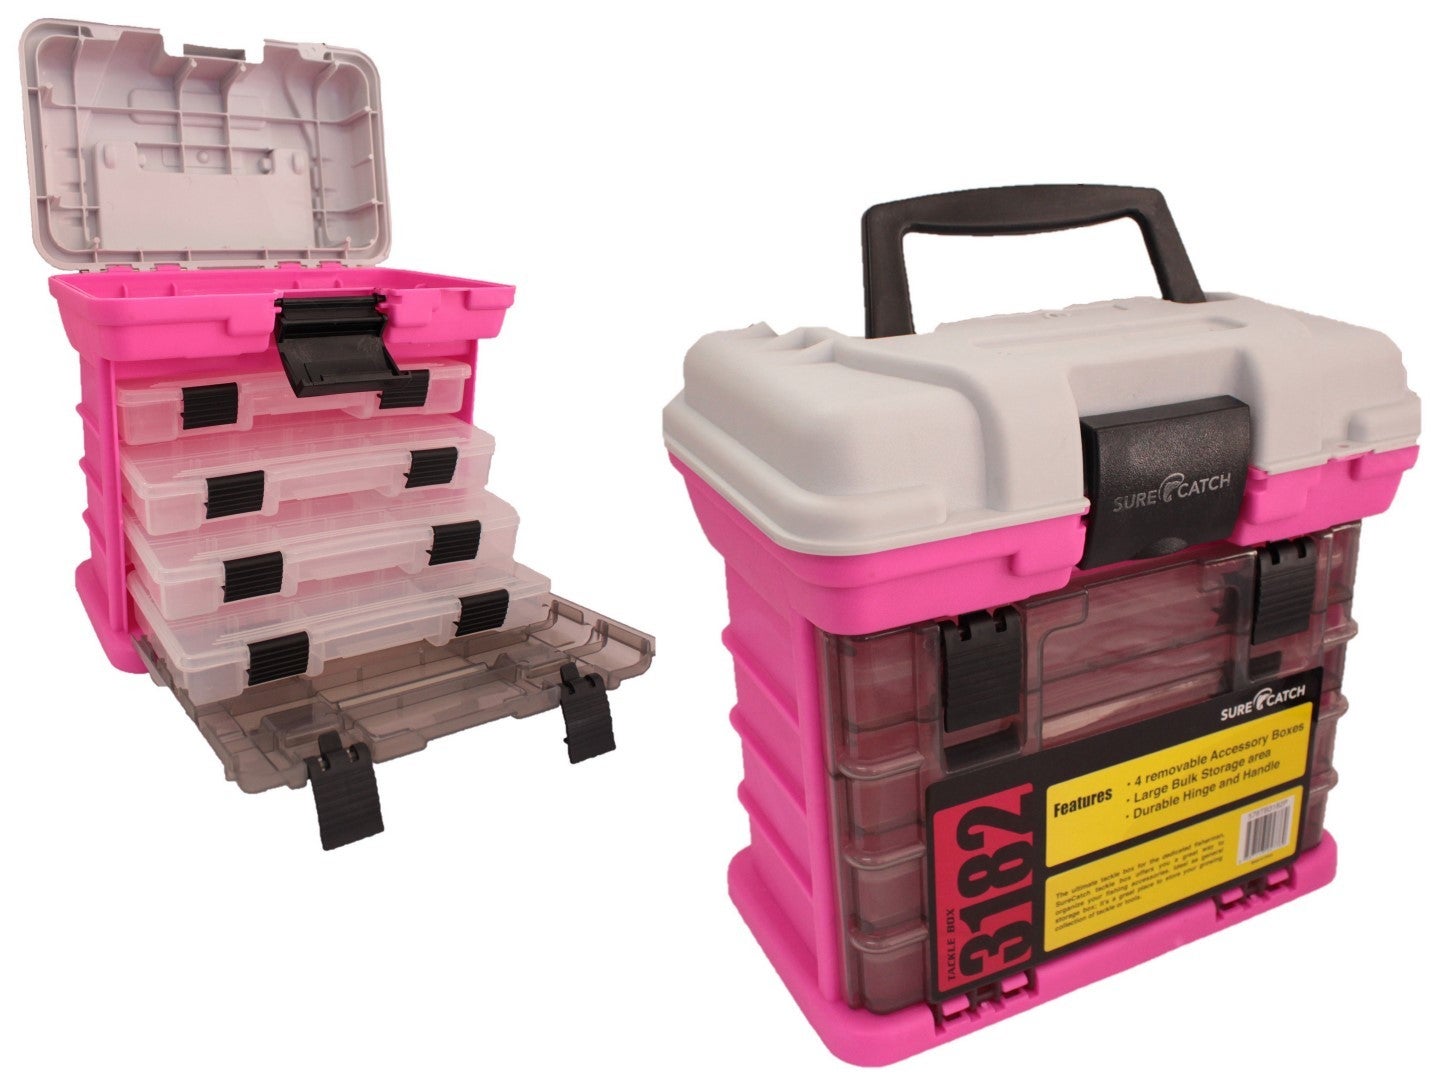 Buy Tackle Boxes Online in Australia - MyDeal